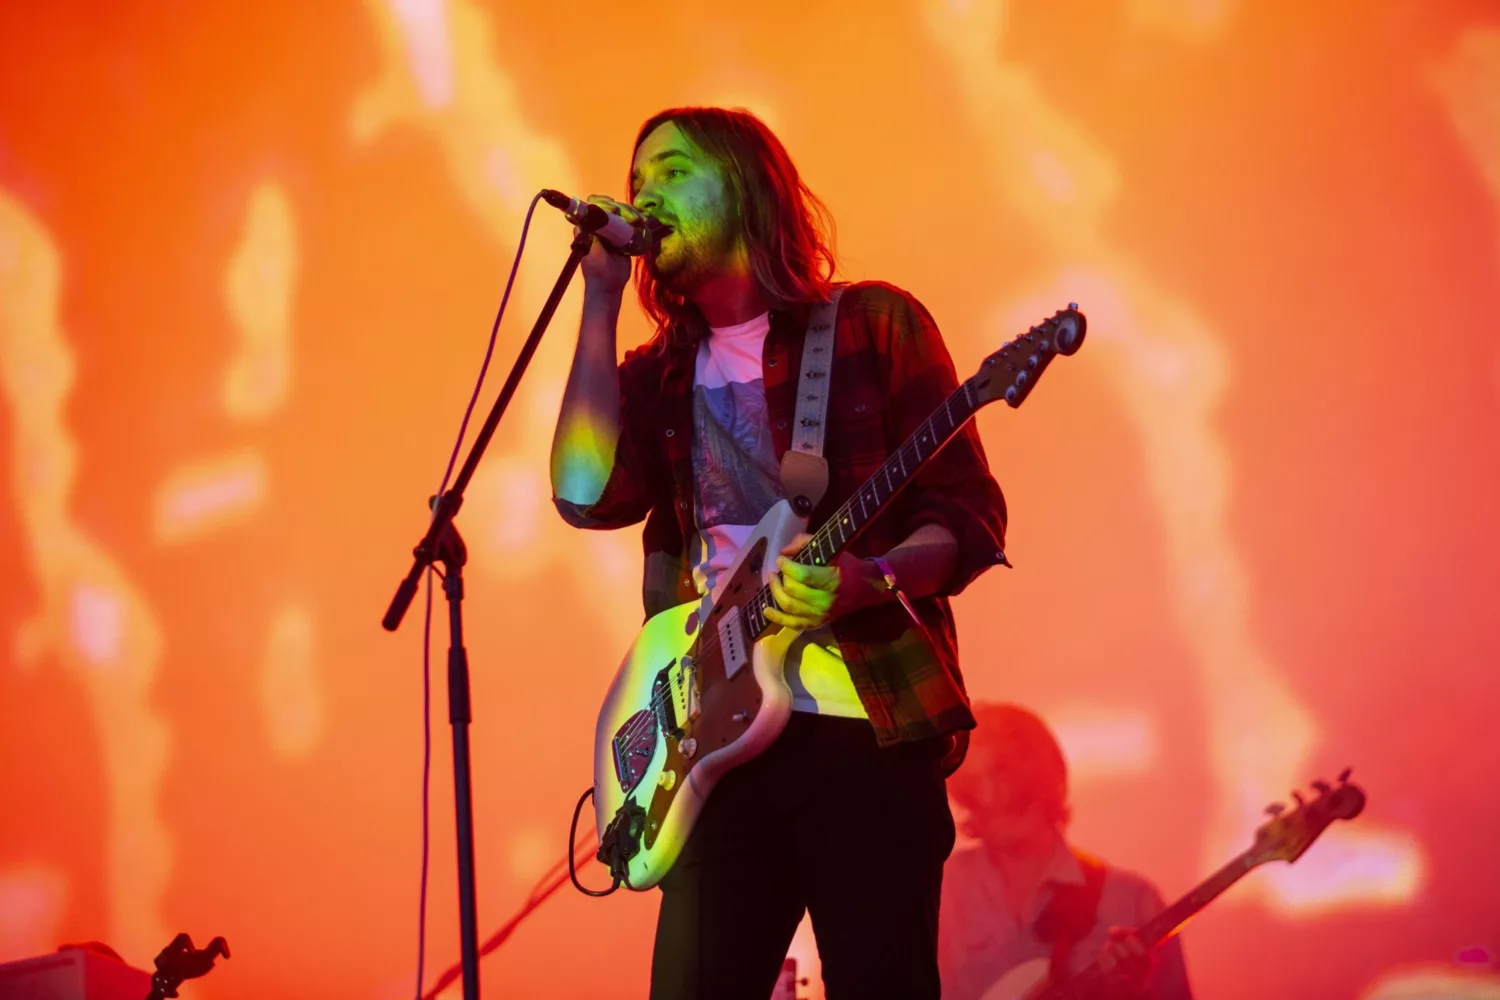 Tame Impala, Janelle Monáe, Pale Waves to play Boston Calling 2019